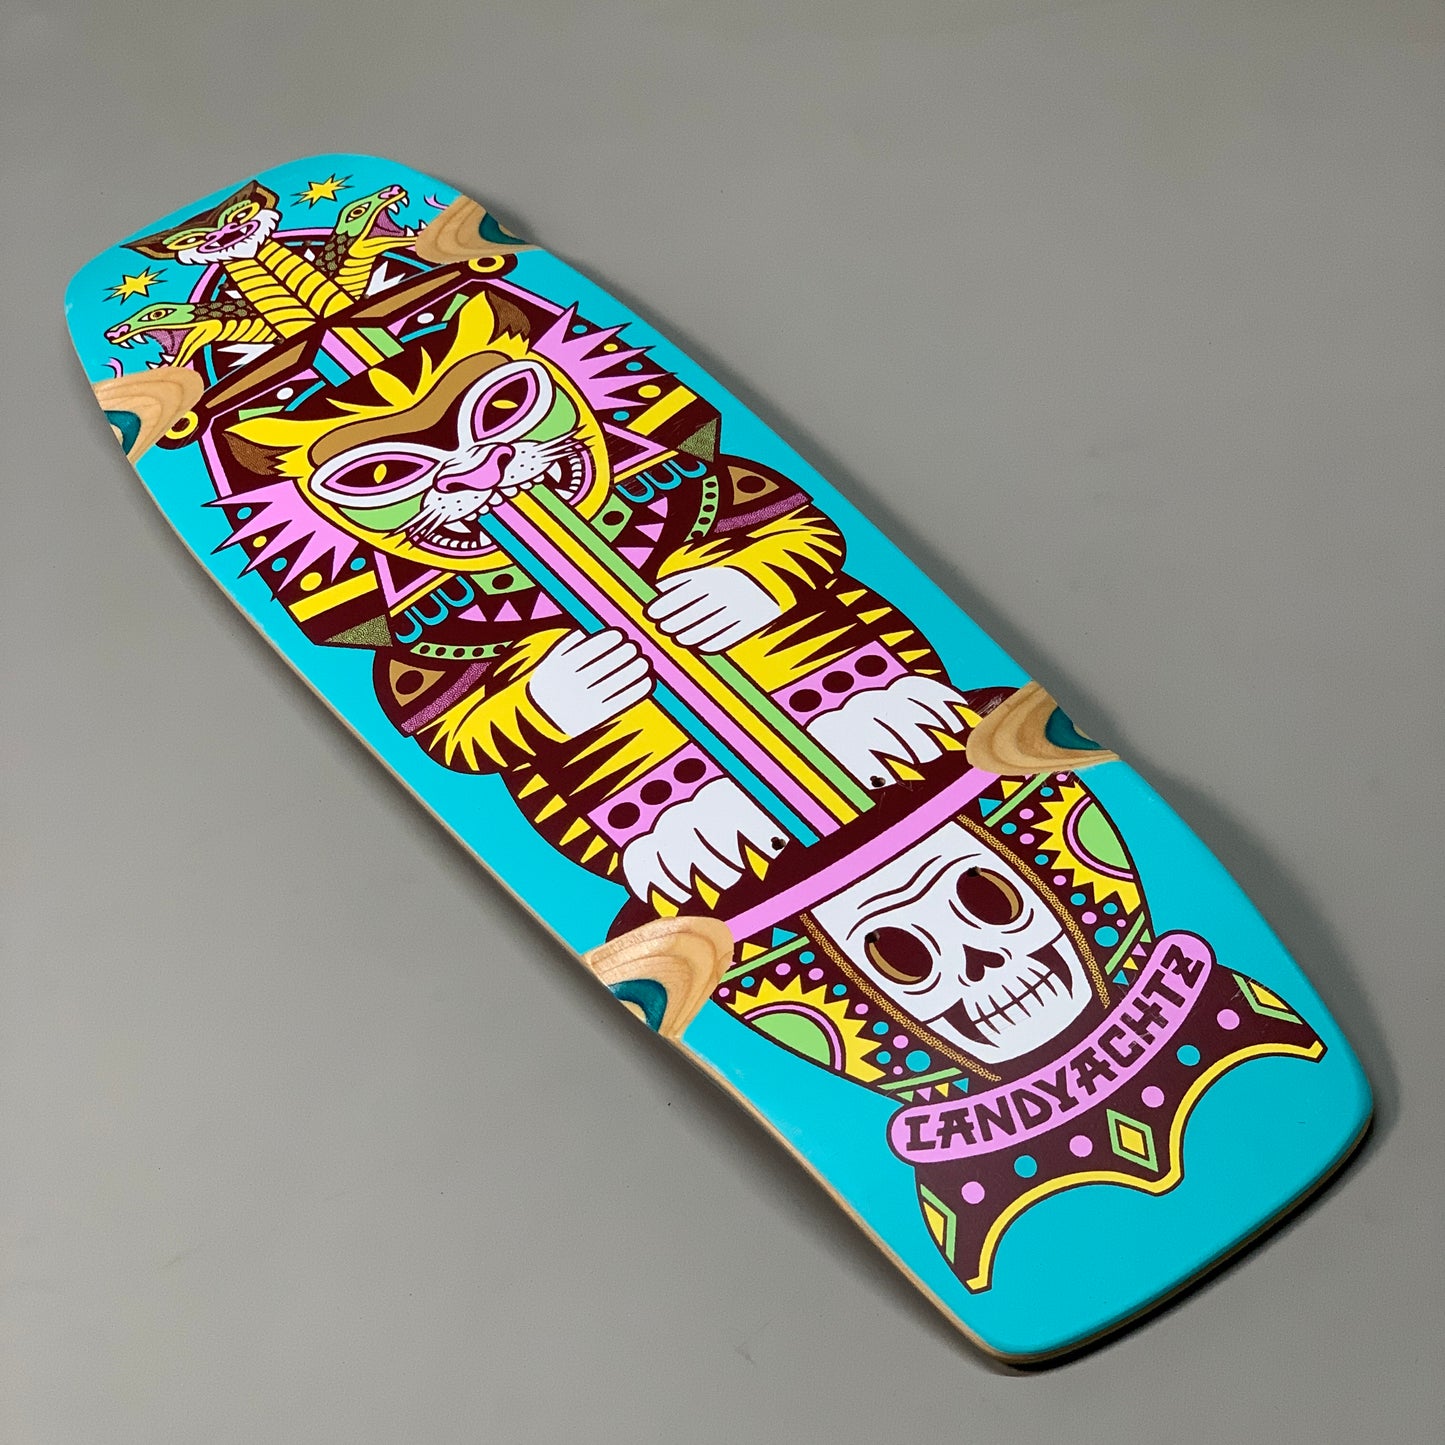 LANDYACHTZ Longboard Dinghy Coffin Kitty Cruiser Kicktail Grip Taped 28.5"x8" (New Other)